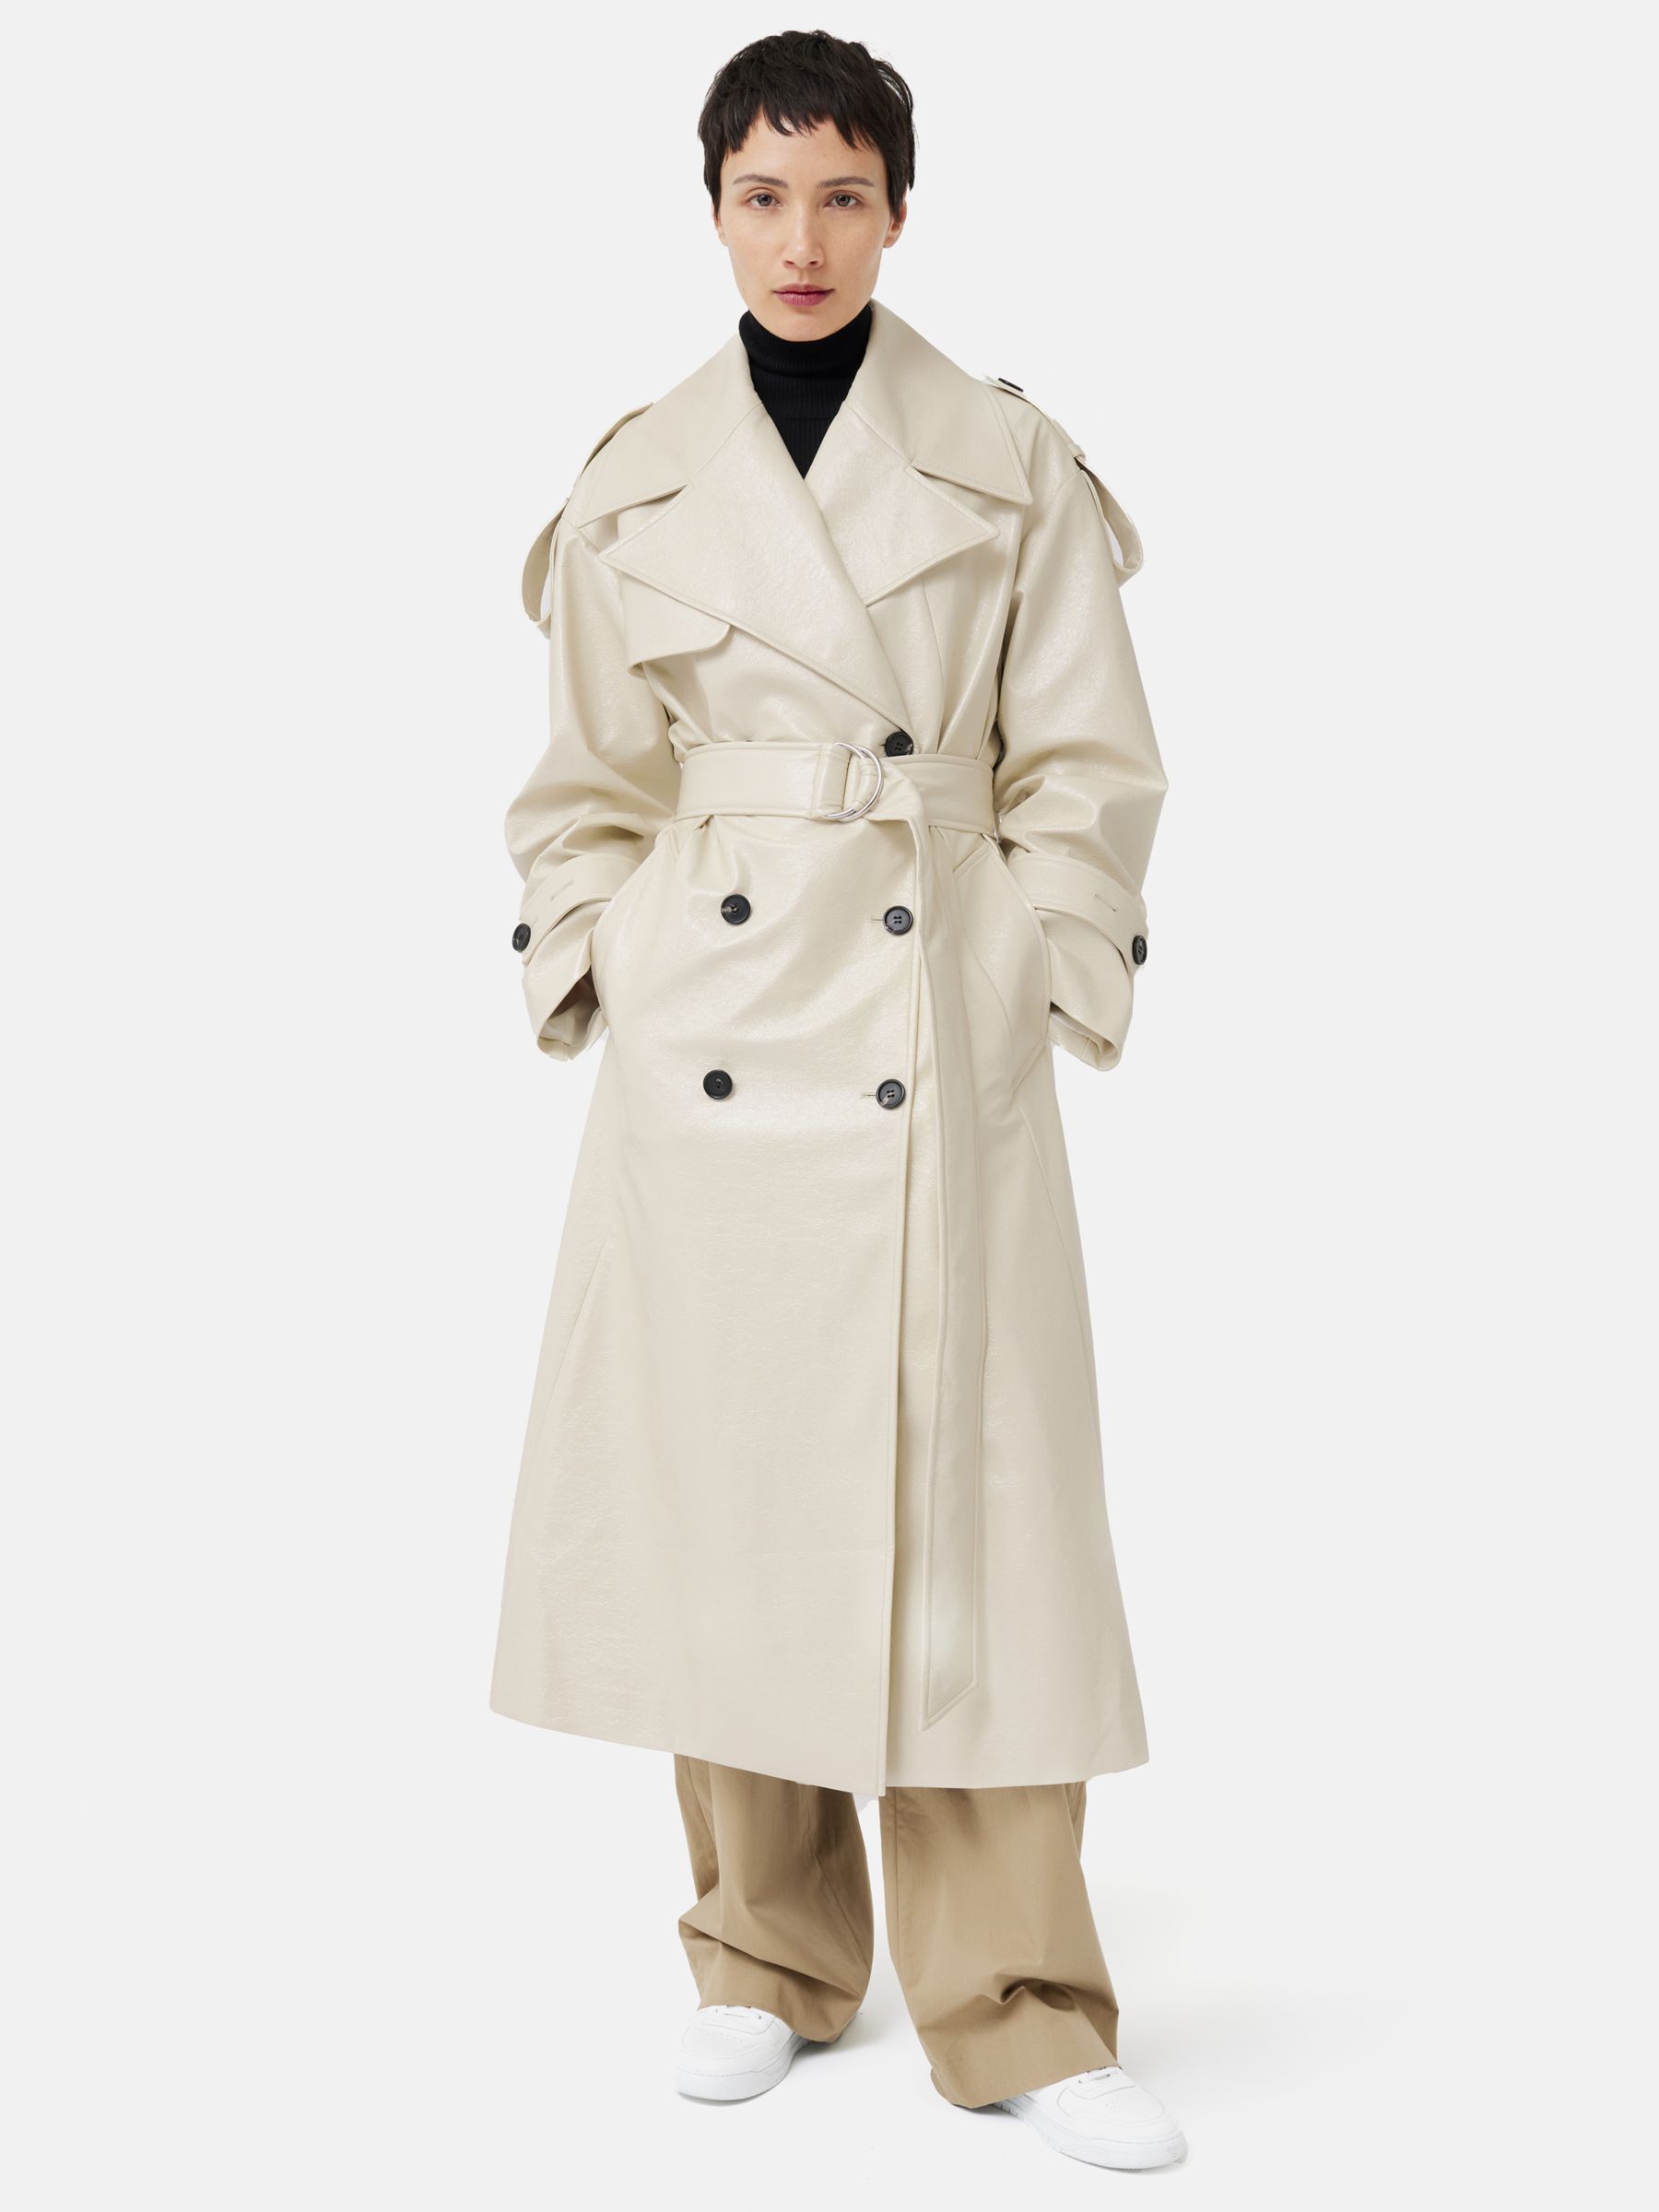 Jigsaw Nelson Patent Trench Coat, Cream at John Lewis & Partners